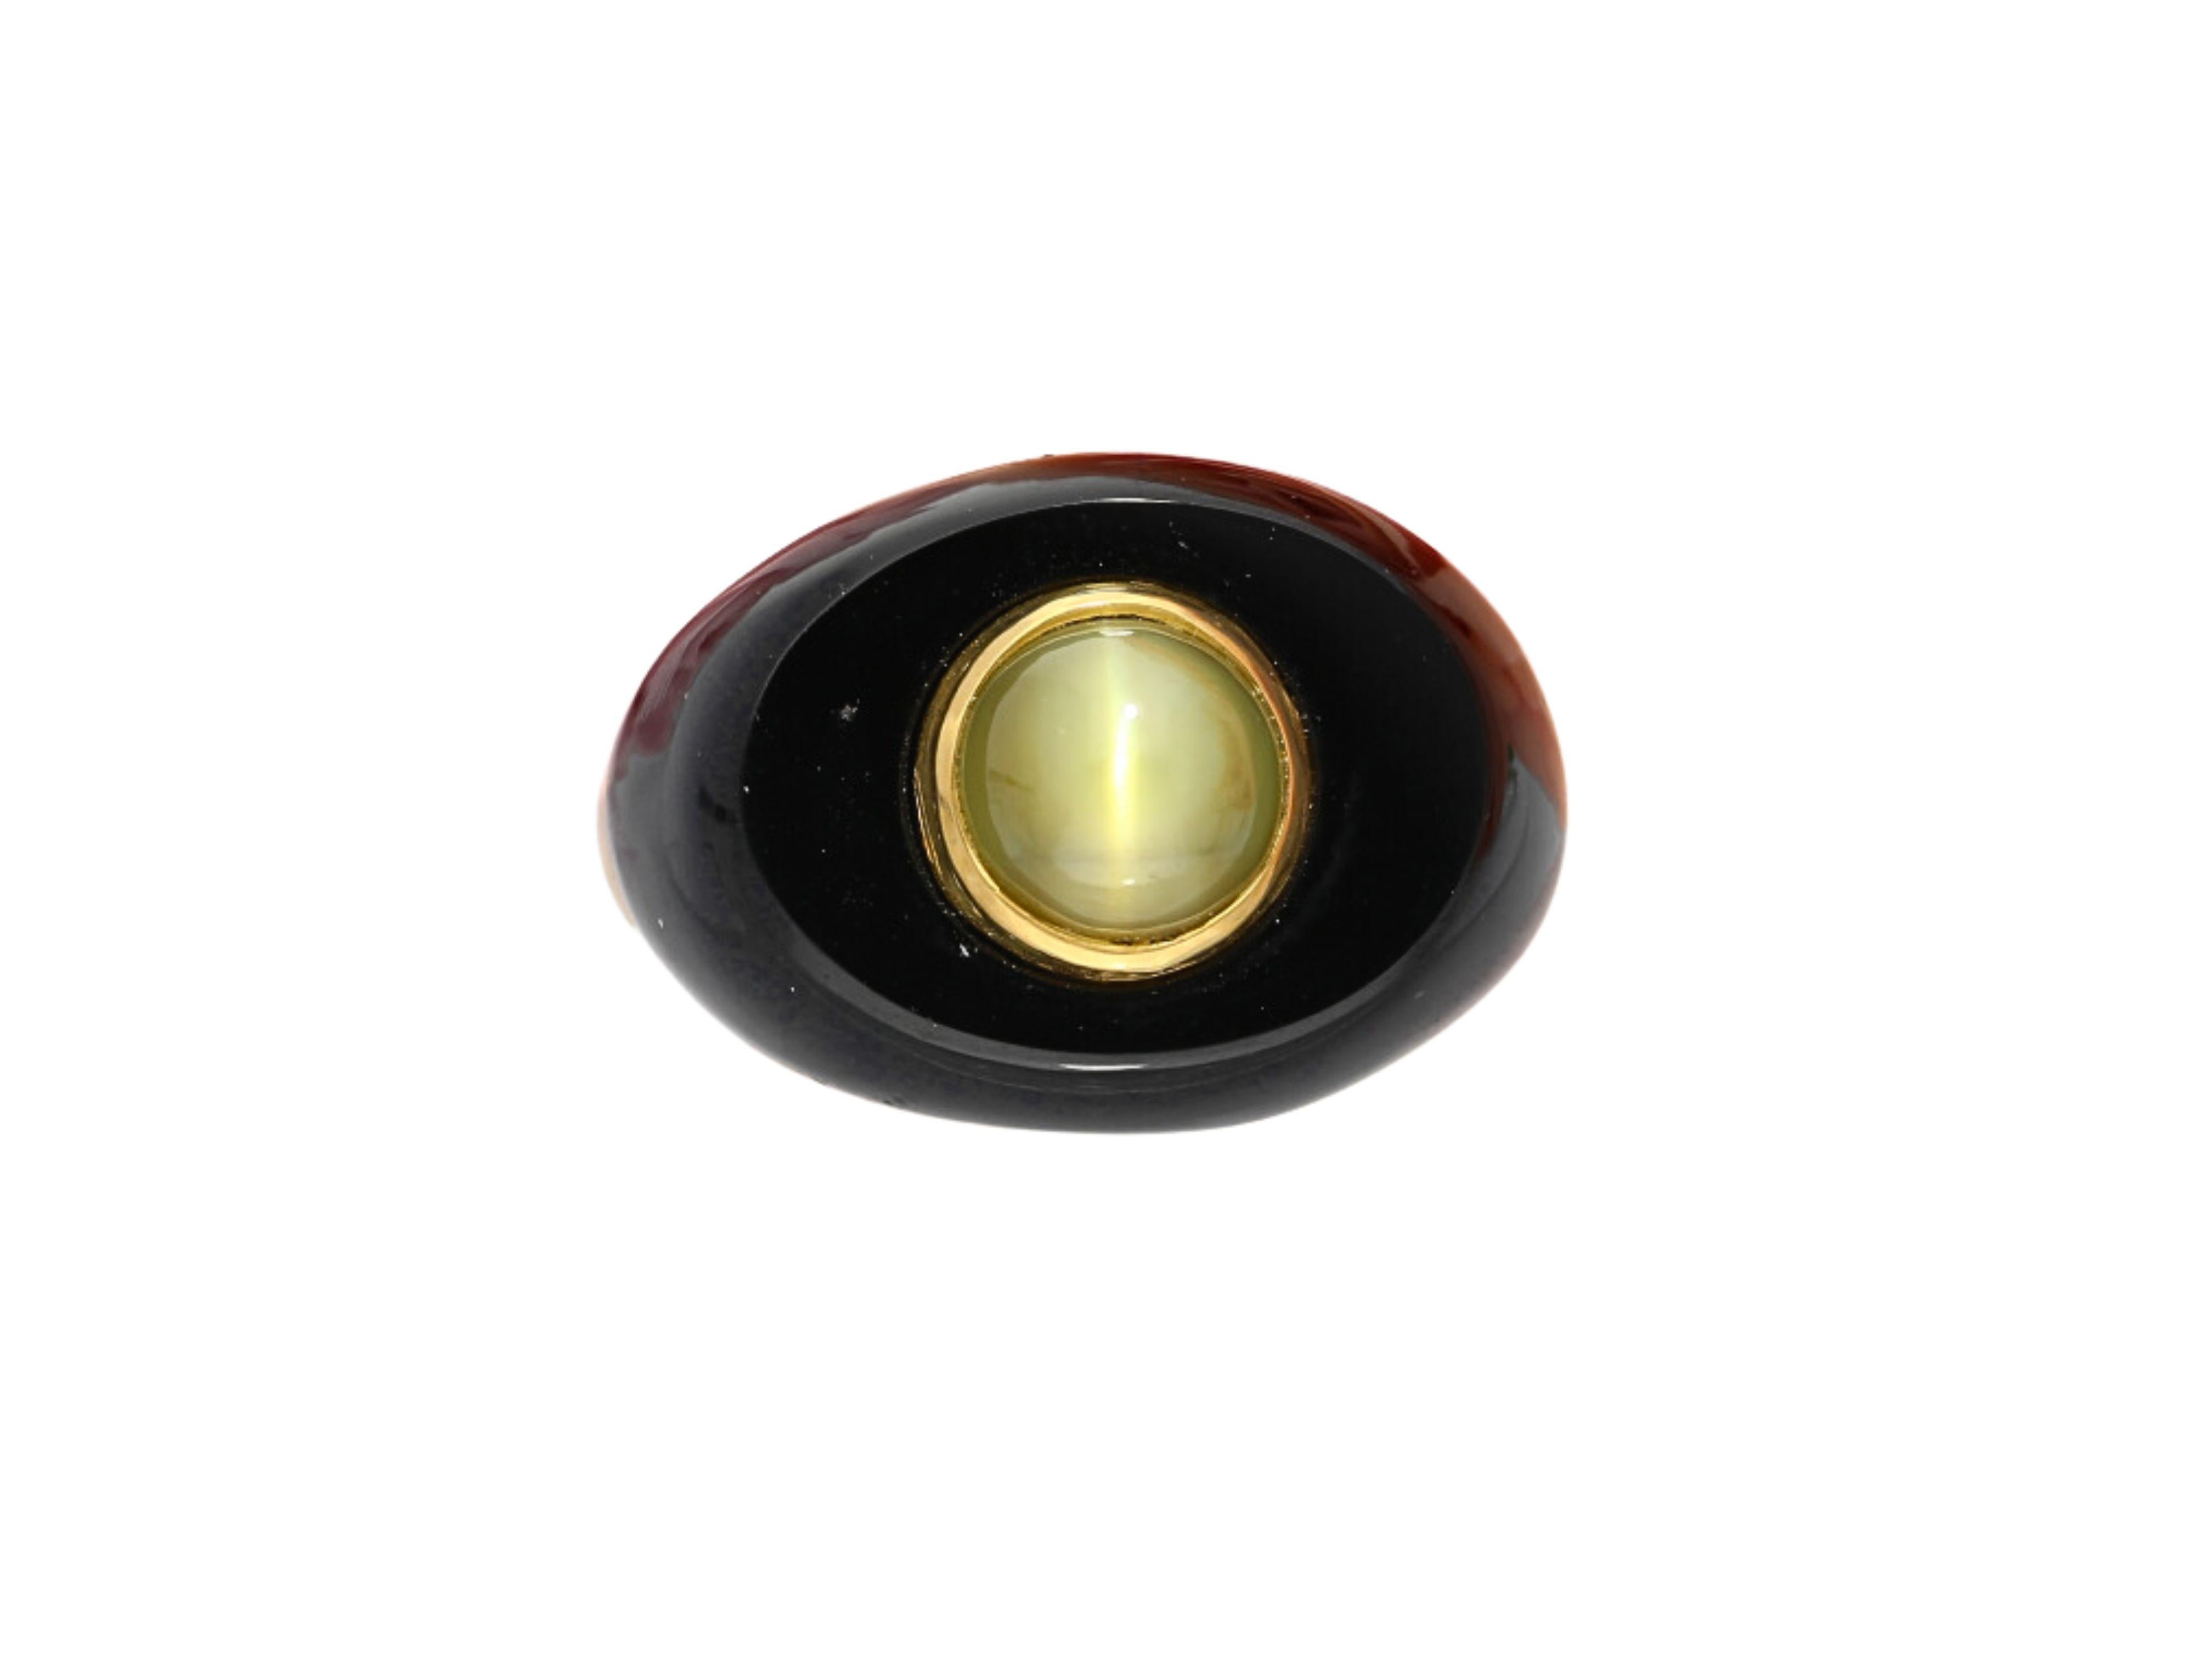 3.50 Carat Green Chrysoberyl Cat’s Eye and Black Onyx Unisex Bezel Ring in 18K Yellow Gold. The cat's eye center stone stands alone with black onyx as a contrast to its eye-like aesthetic. A stunning unisex ring with a smooth polished